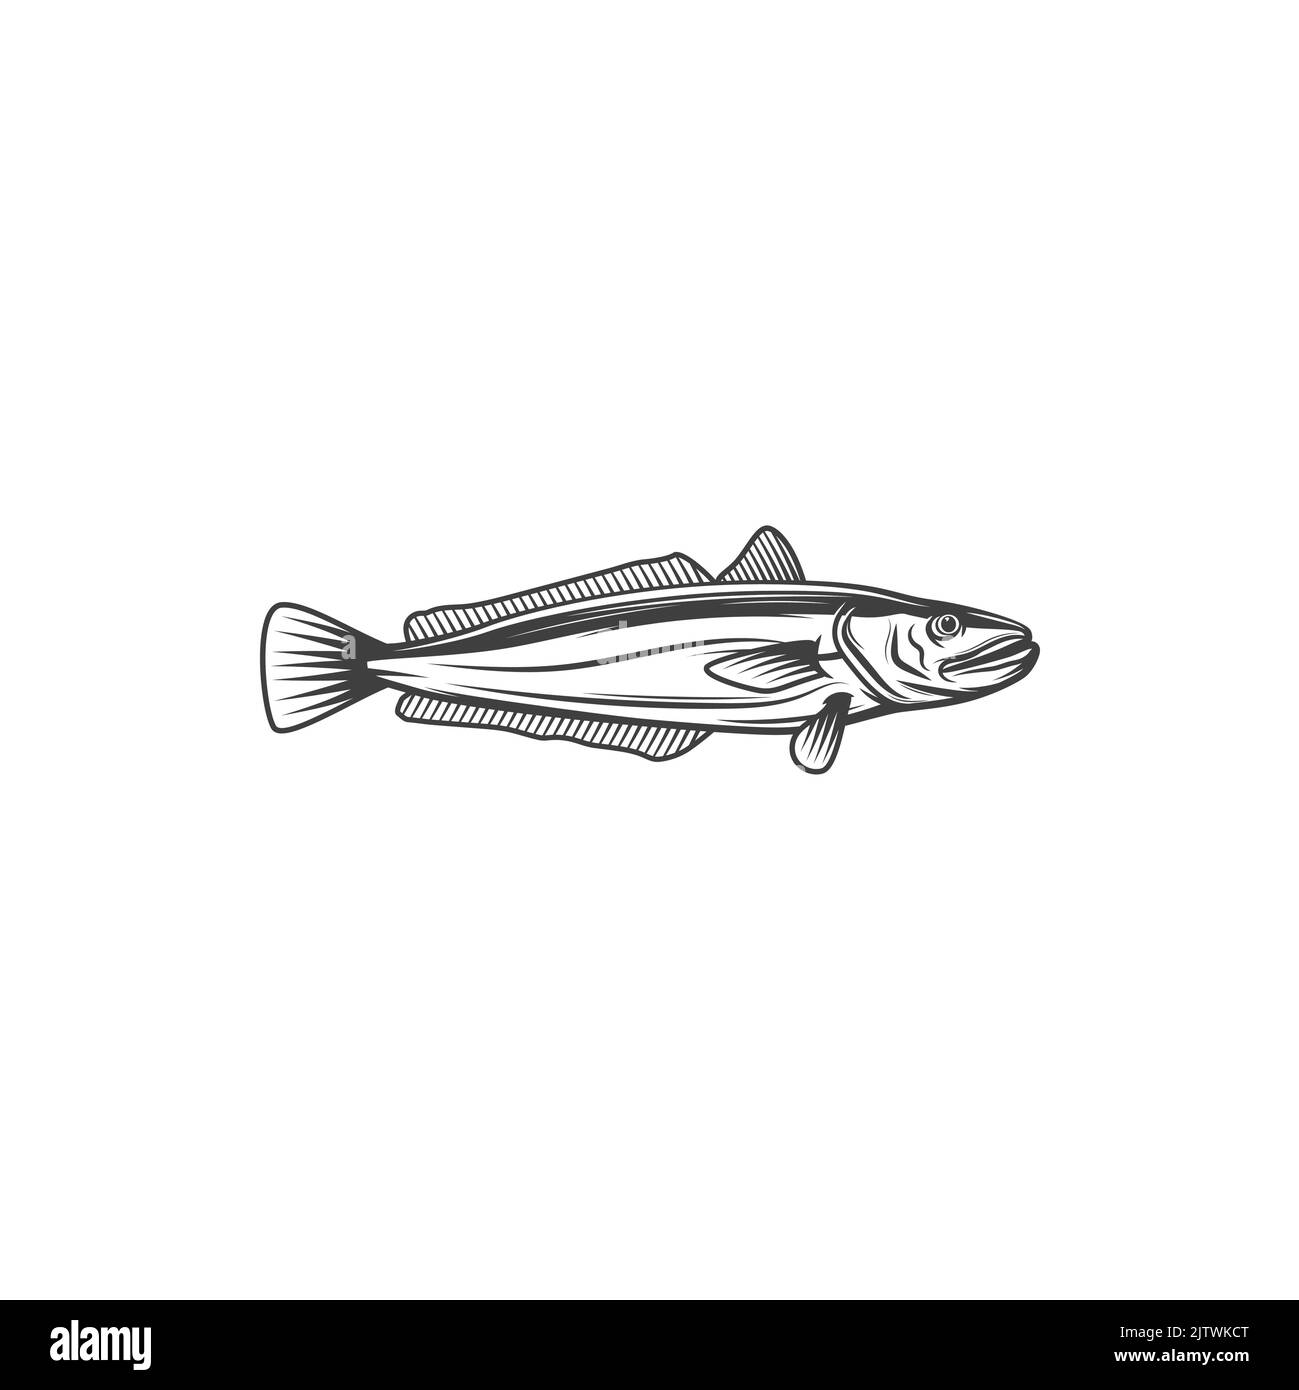 Hake cod-like fish isolated monochrome icon. Vector psychidae Atlantic ocean habitat, saltwater cold blooded fish, raw fresh or cooked. Hake merluccius, European hake, fishing sport mascot or trophy Stock Vector